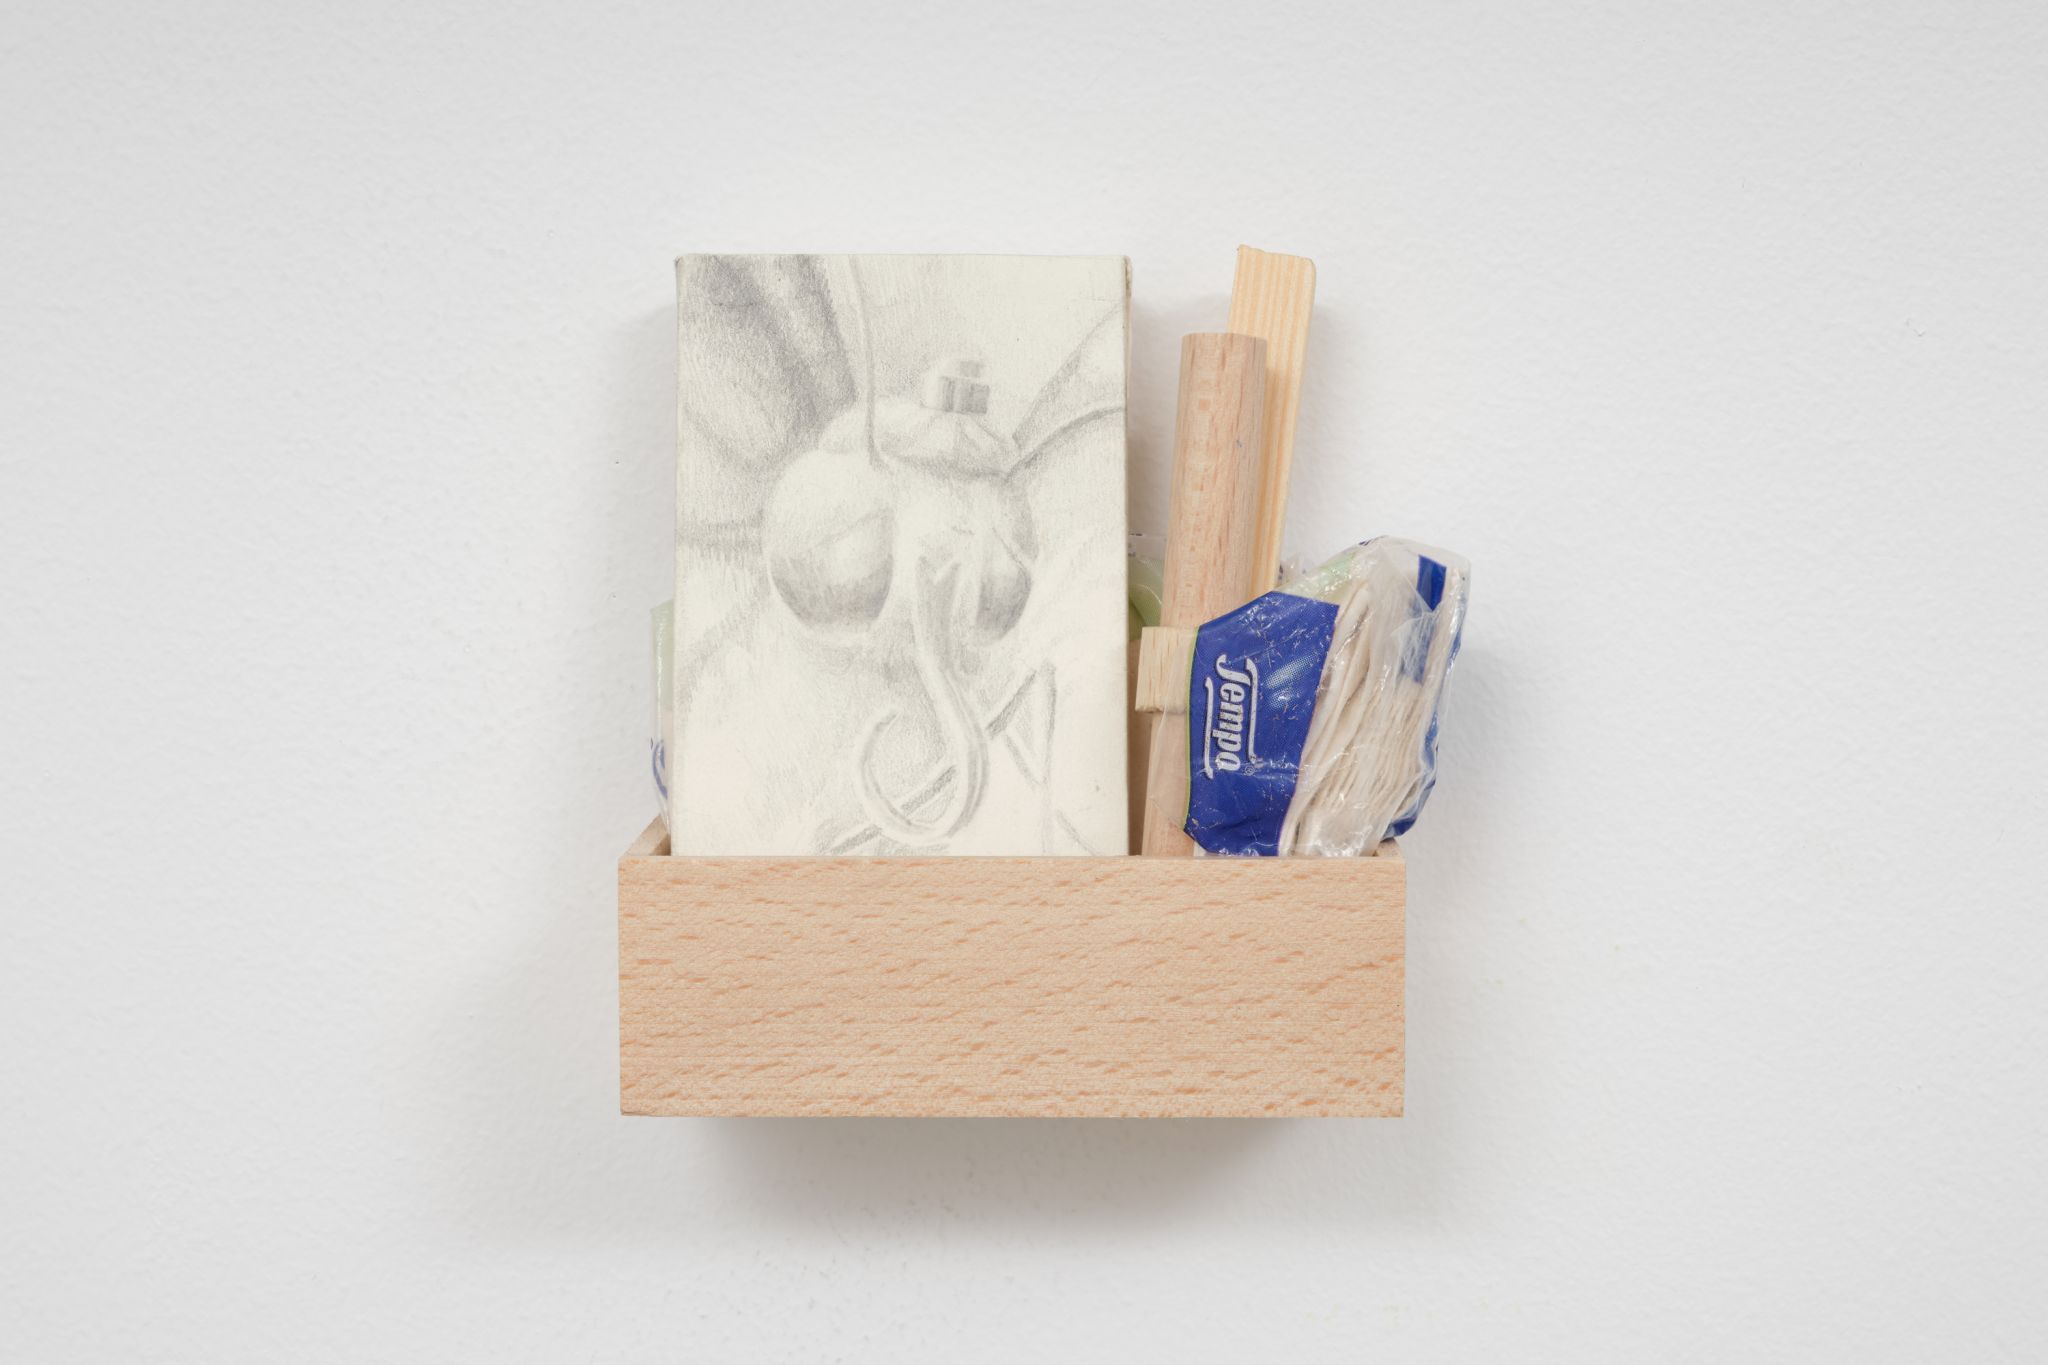 Nicholas Stewens, Sorry you’re sick, 2024, Pencil on paper, wood, tissues (tempo), 10 ⁠× ⁠8 ⁠× ⁠4 ⁠⁠cm